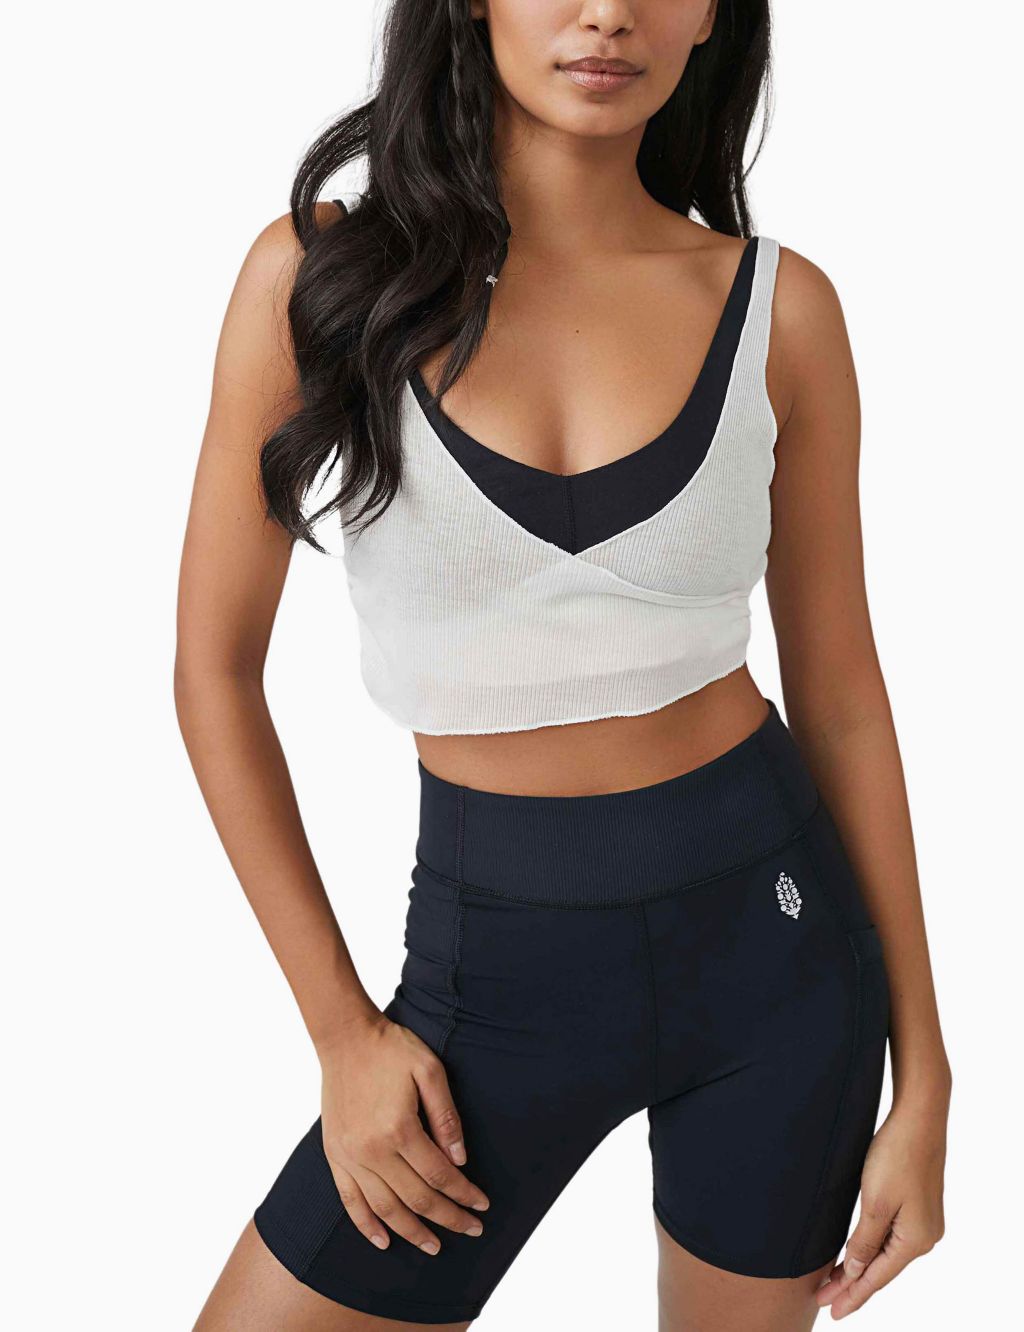 Reach For The Stars Sports Bra image 1